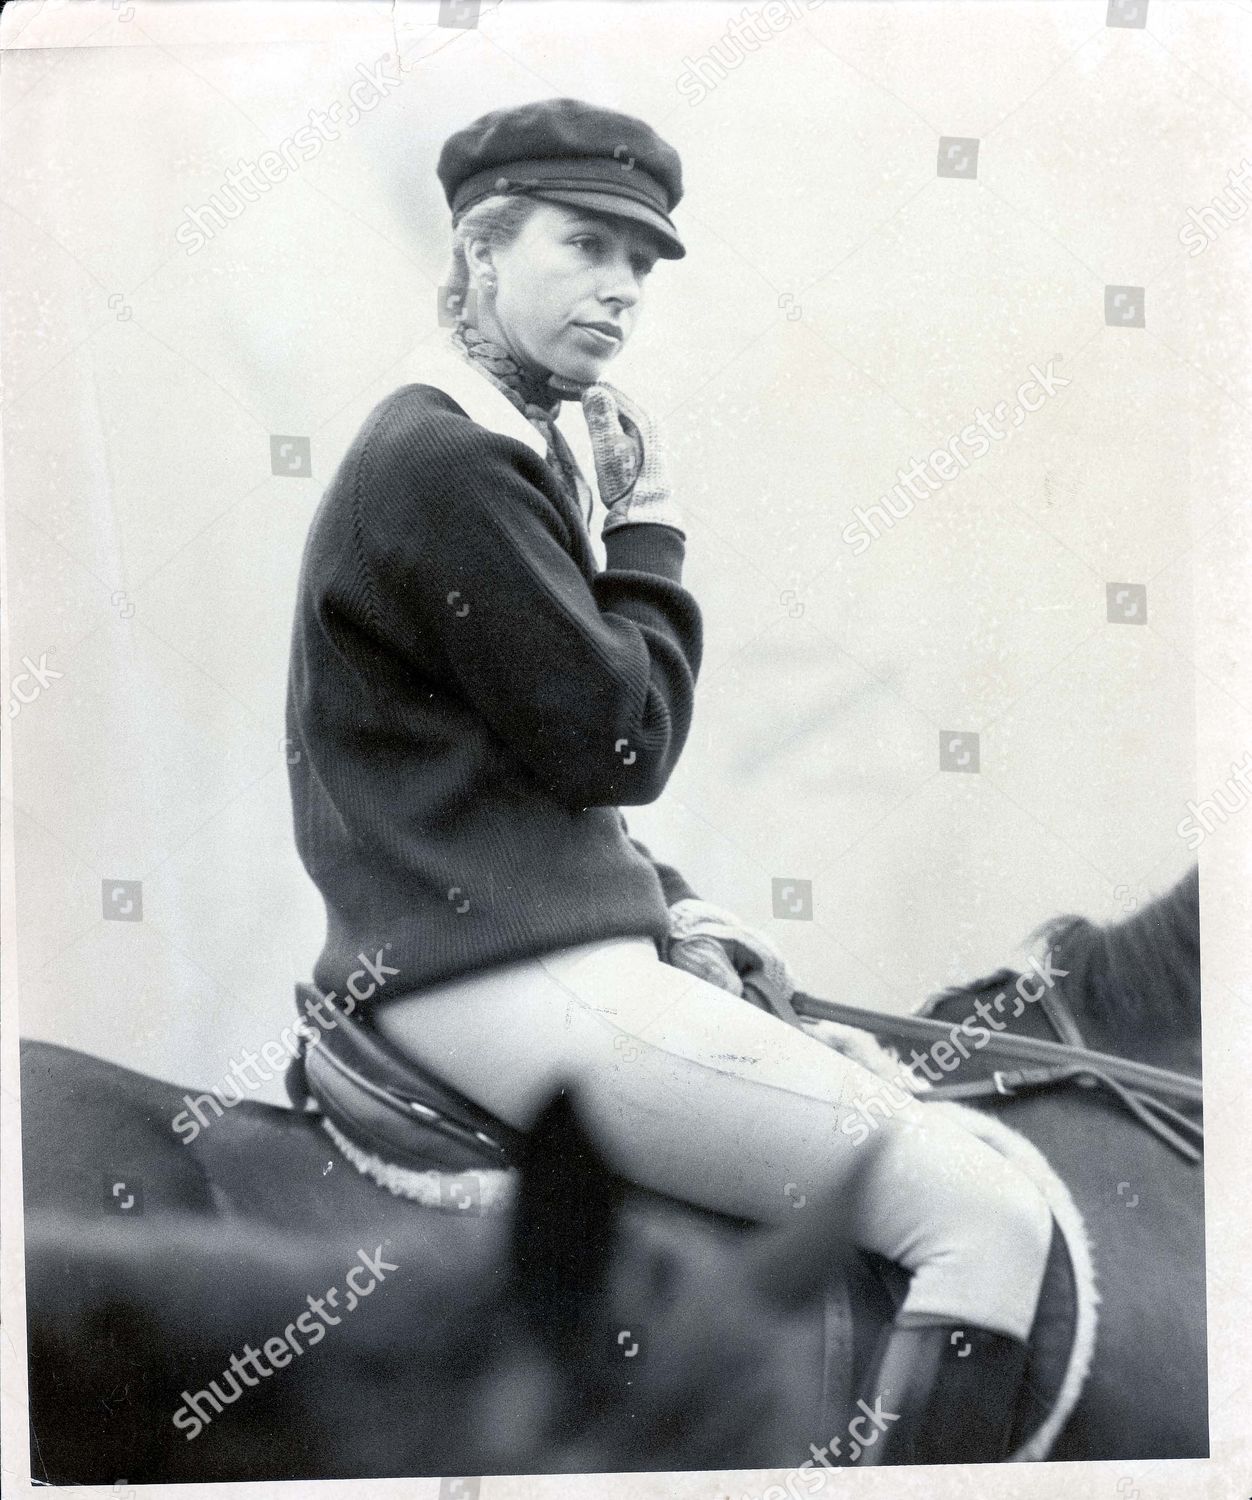 princess-anne-now-princess-royal-riding-september-1974-princess-anne-at-burleigh-today-royalty-shutterstock-editorial-892210a.jpg